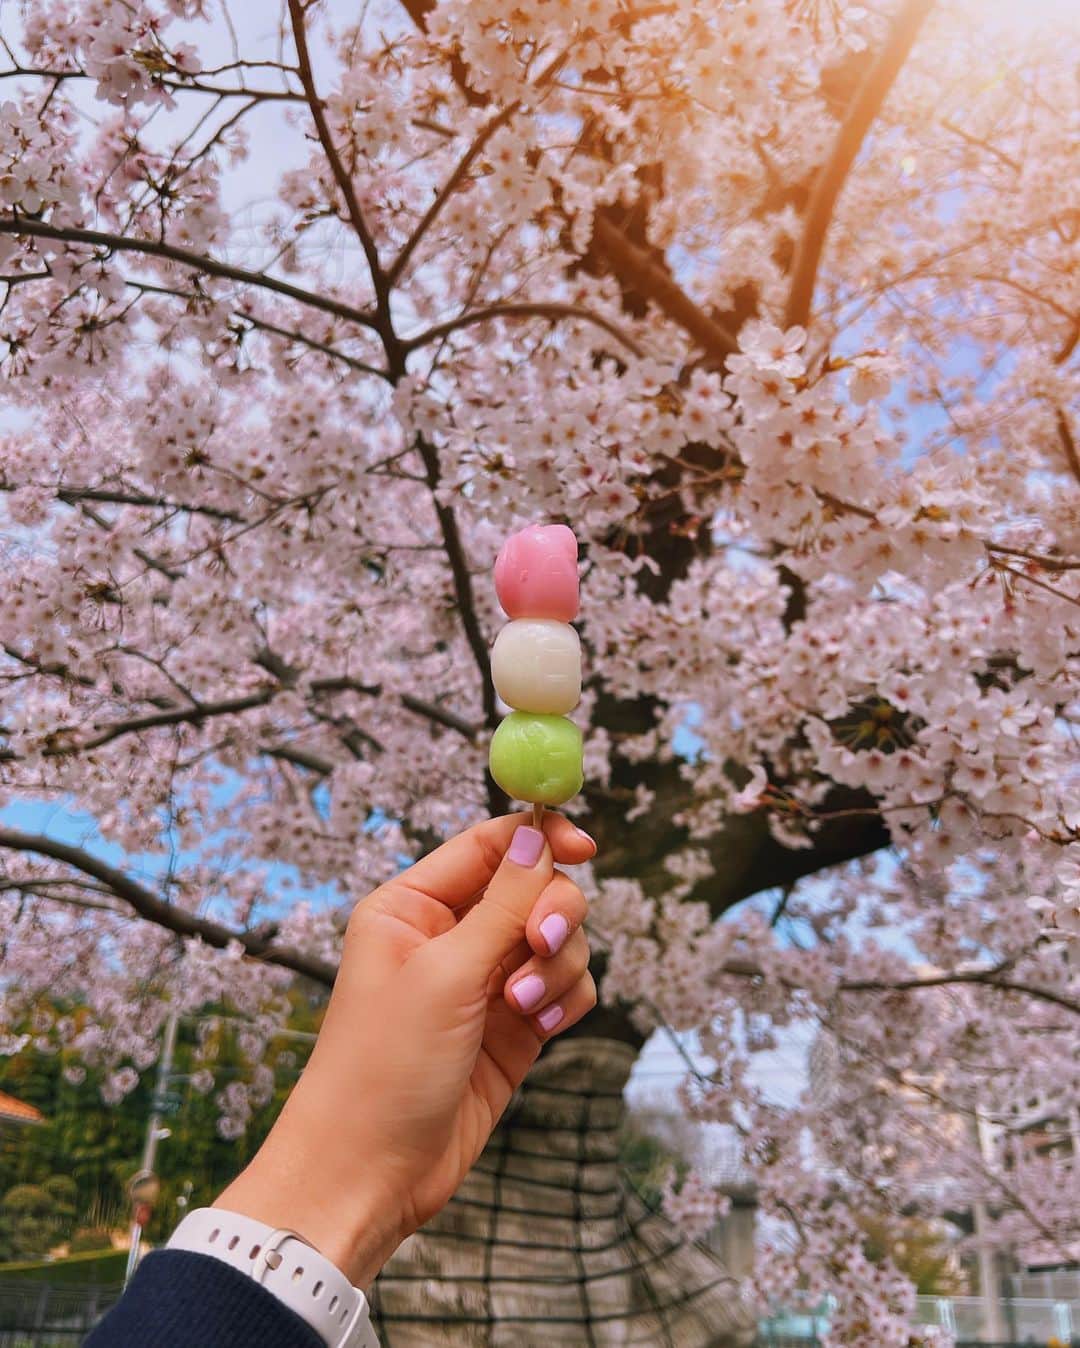 Girleatworldのインスタグラム：「🌸🍡 A fleeting beauty - Sakura blooms last only a week every year. The petals are delicate and fragile. Once they reach full bloom, they constantly shed with even the gentlest sway from the wind. So while they're here, we have to appreciate it!  This rice cake snack is called Hanami dango. It's so important to japanese culture that there is even an emoji for it 🍡 Since sakura blooms doesn't last long, it became an important tradition to go to the nearest park with picnic mats and some packed food for sakura viewing, known as Hanami.  Hanami 花見 means "watching flowers" (hana 花 = flowers; mi 見 = eyes / to watch) and Dango means "rice cake". Japanese people eat dango all-year round, but this variation with pink, white and green is traditionally eaten during Hanami season. The pink color comes from azuki (red bean) and the green is from green tea 🍵  The last time I was in Japan during Sakura season was six years ago. And, this is actually my first time being in Tokyo for it!  #RealLifeEmoji #EmojiIRL #EmojisInTheWild #shotoniphone #iphone13promax」